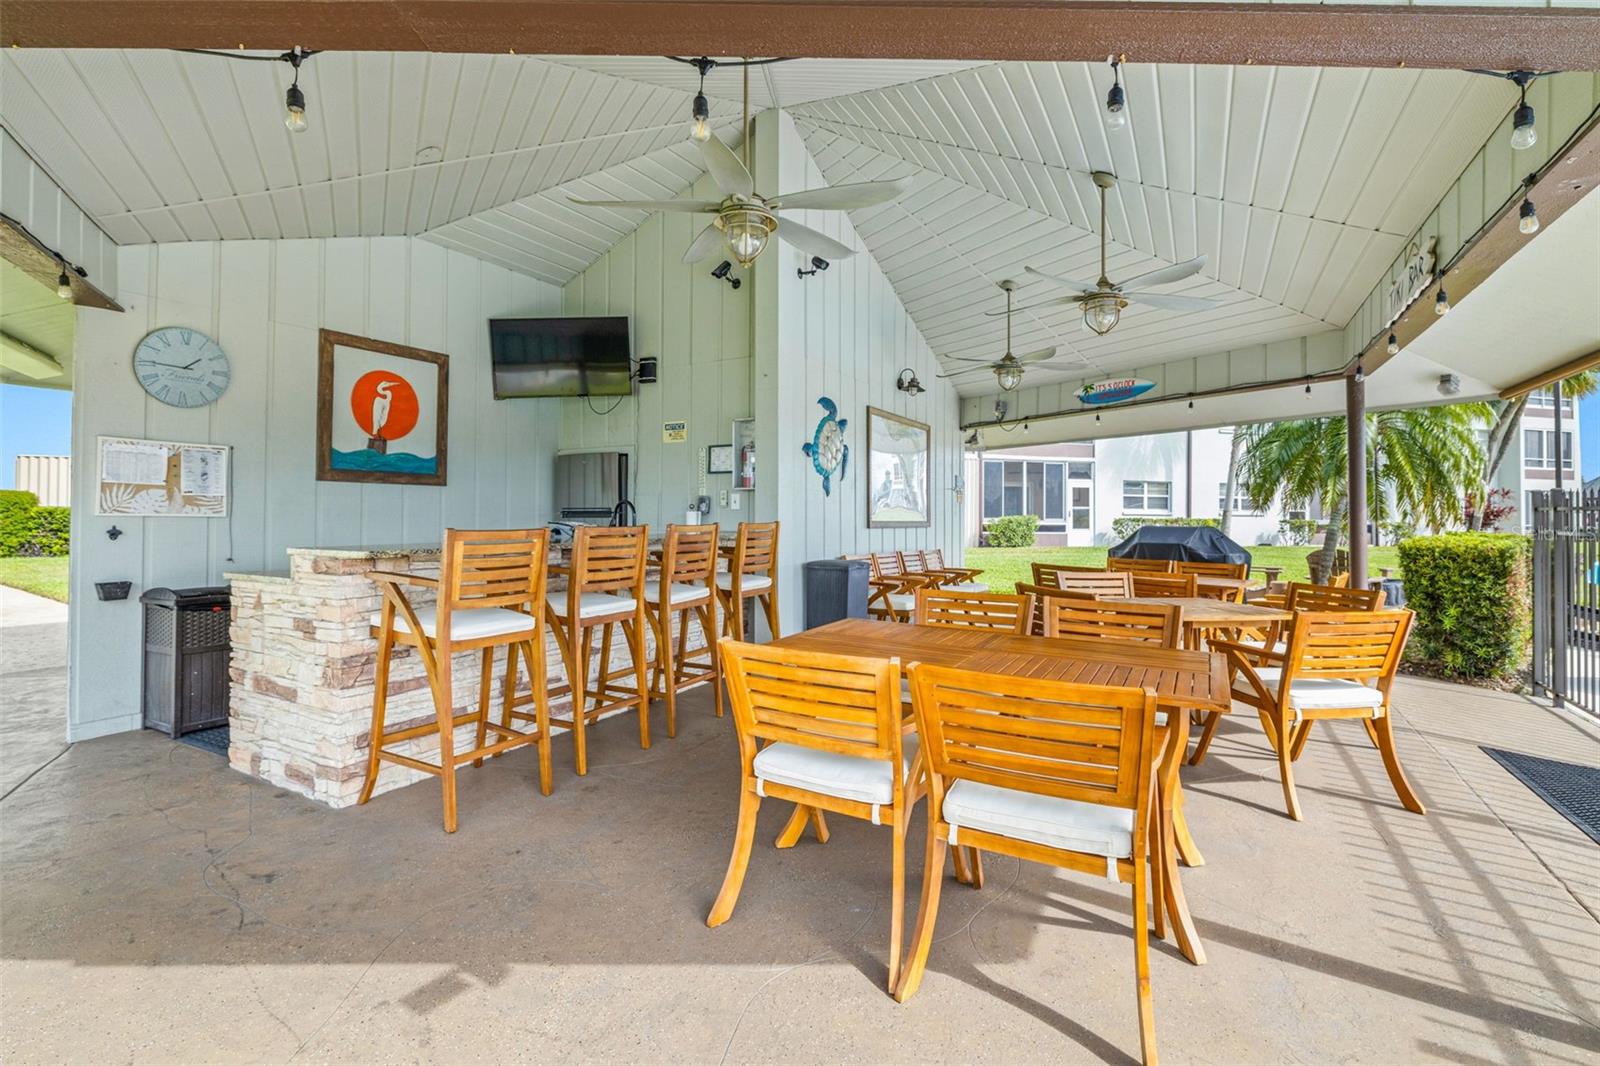 Tiki Hut near the pool for outdoor fun includes a kitchen, seating, and TV for those important sporting events!